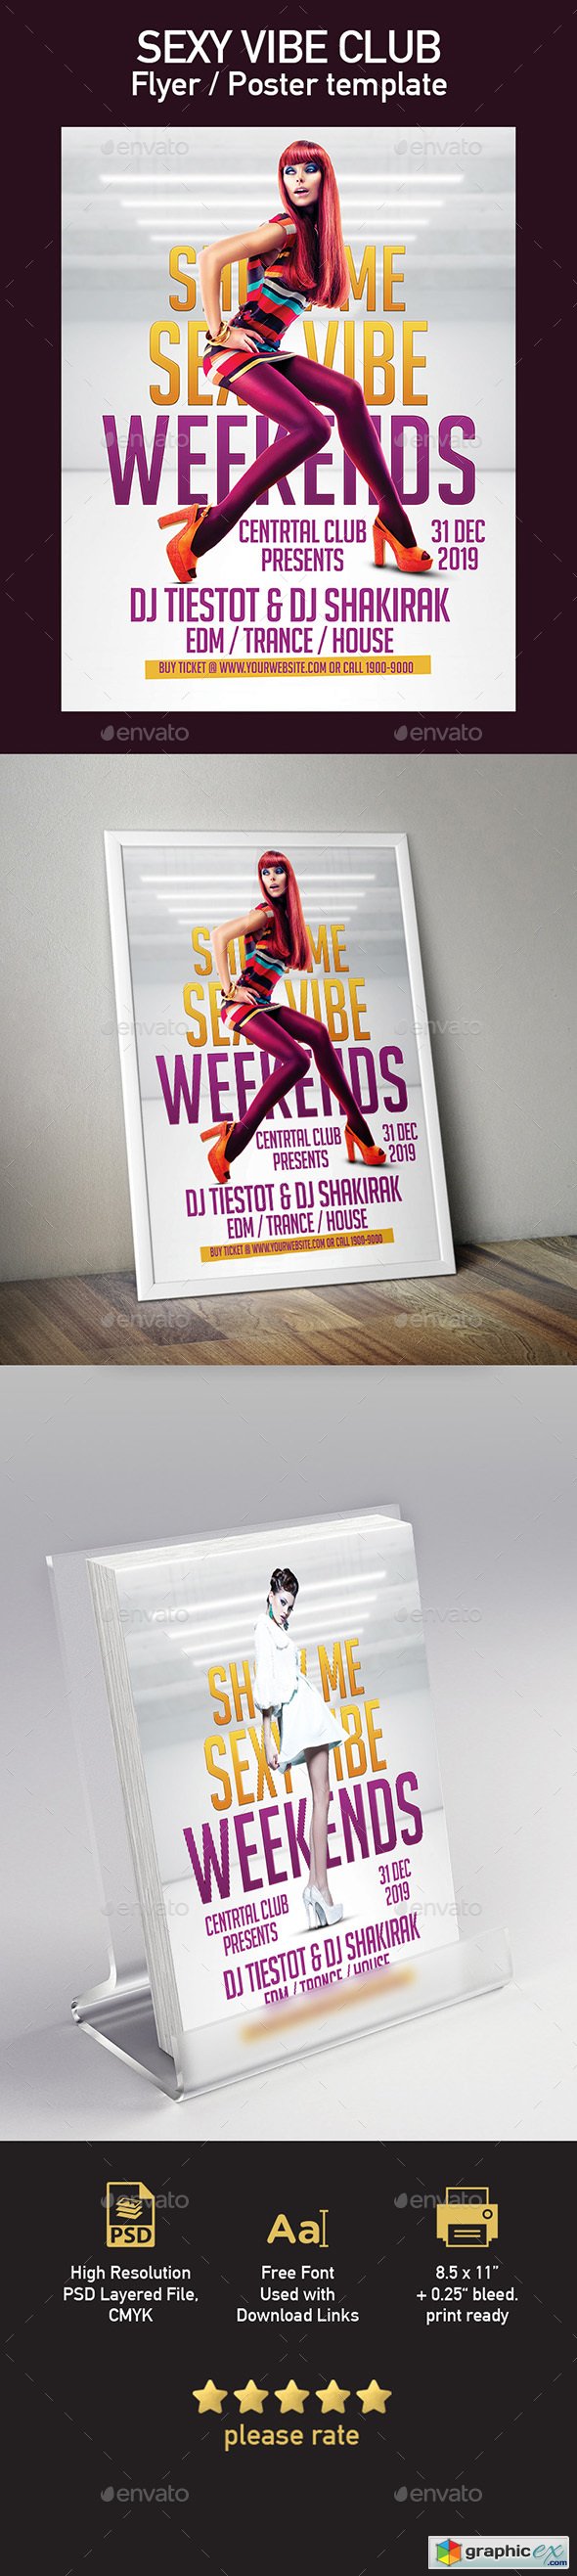 Sexy Vibe Club Flyer Poster Template